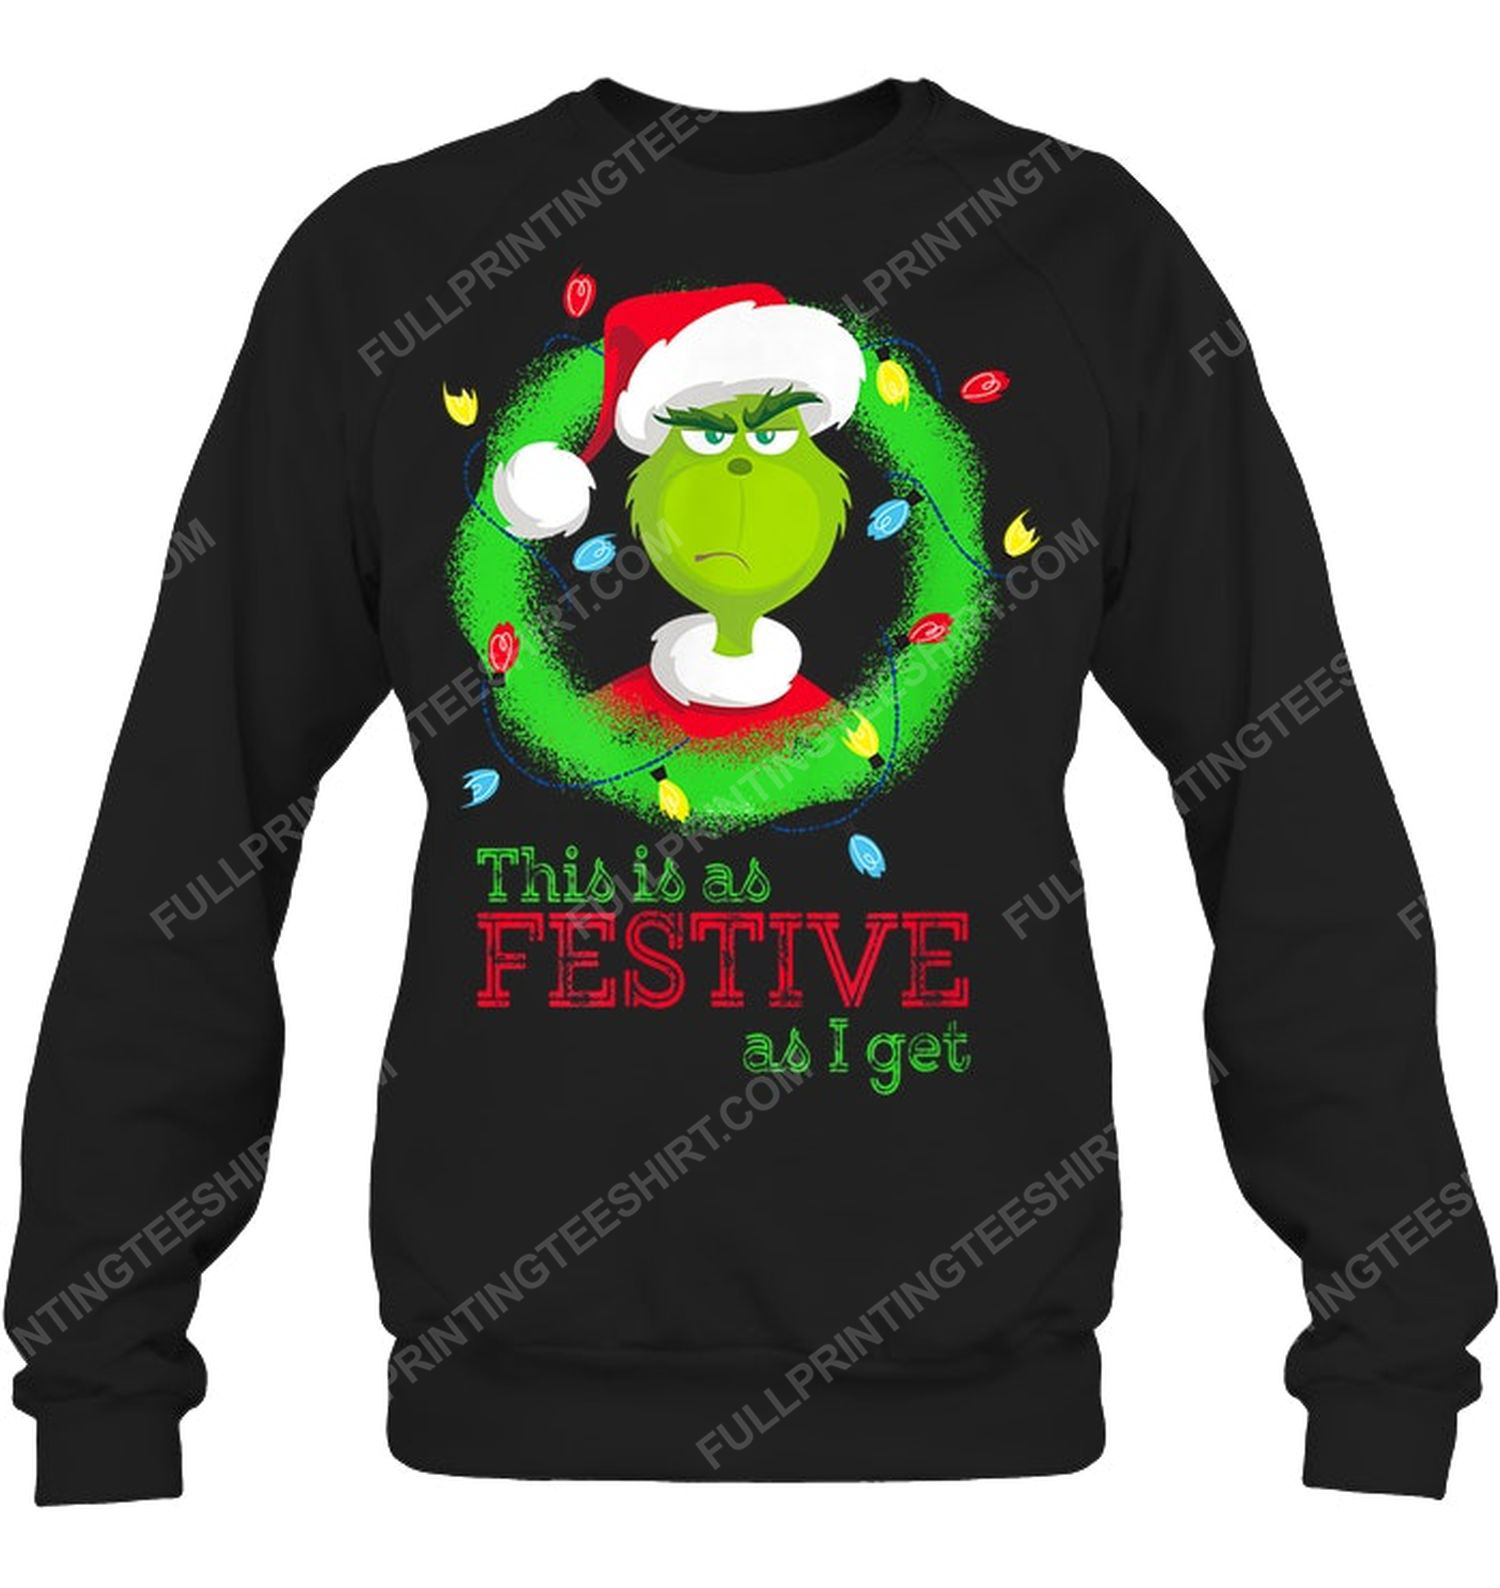 Christmas time the grinch this is as festive as i get sweatshirt